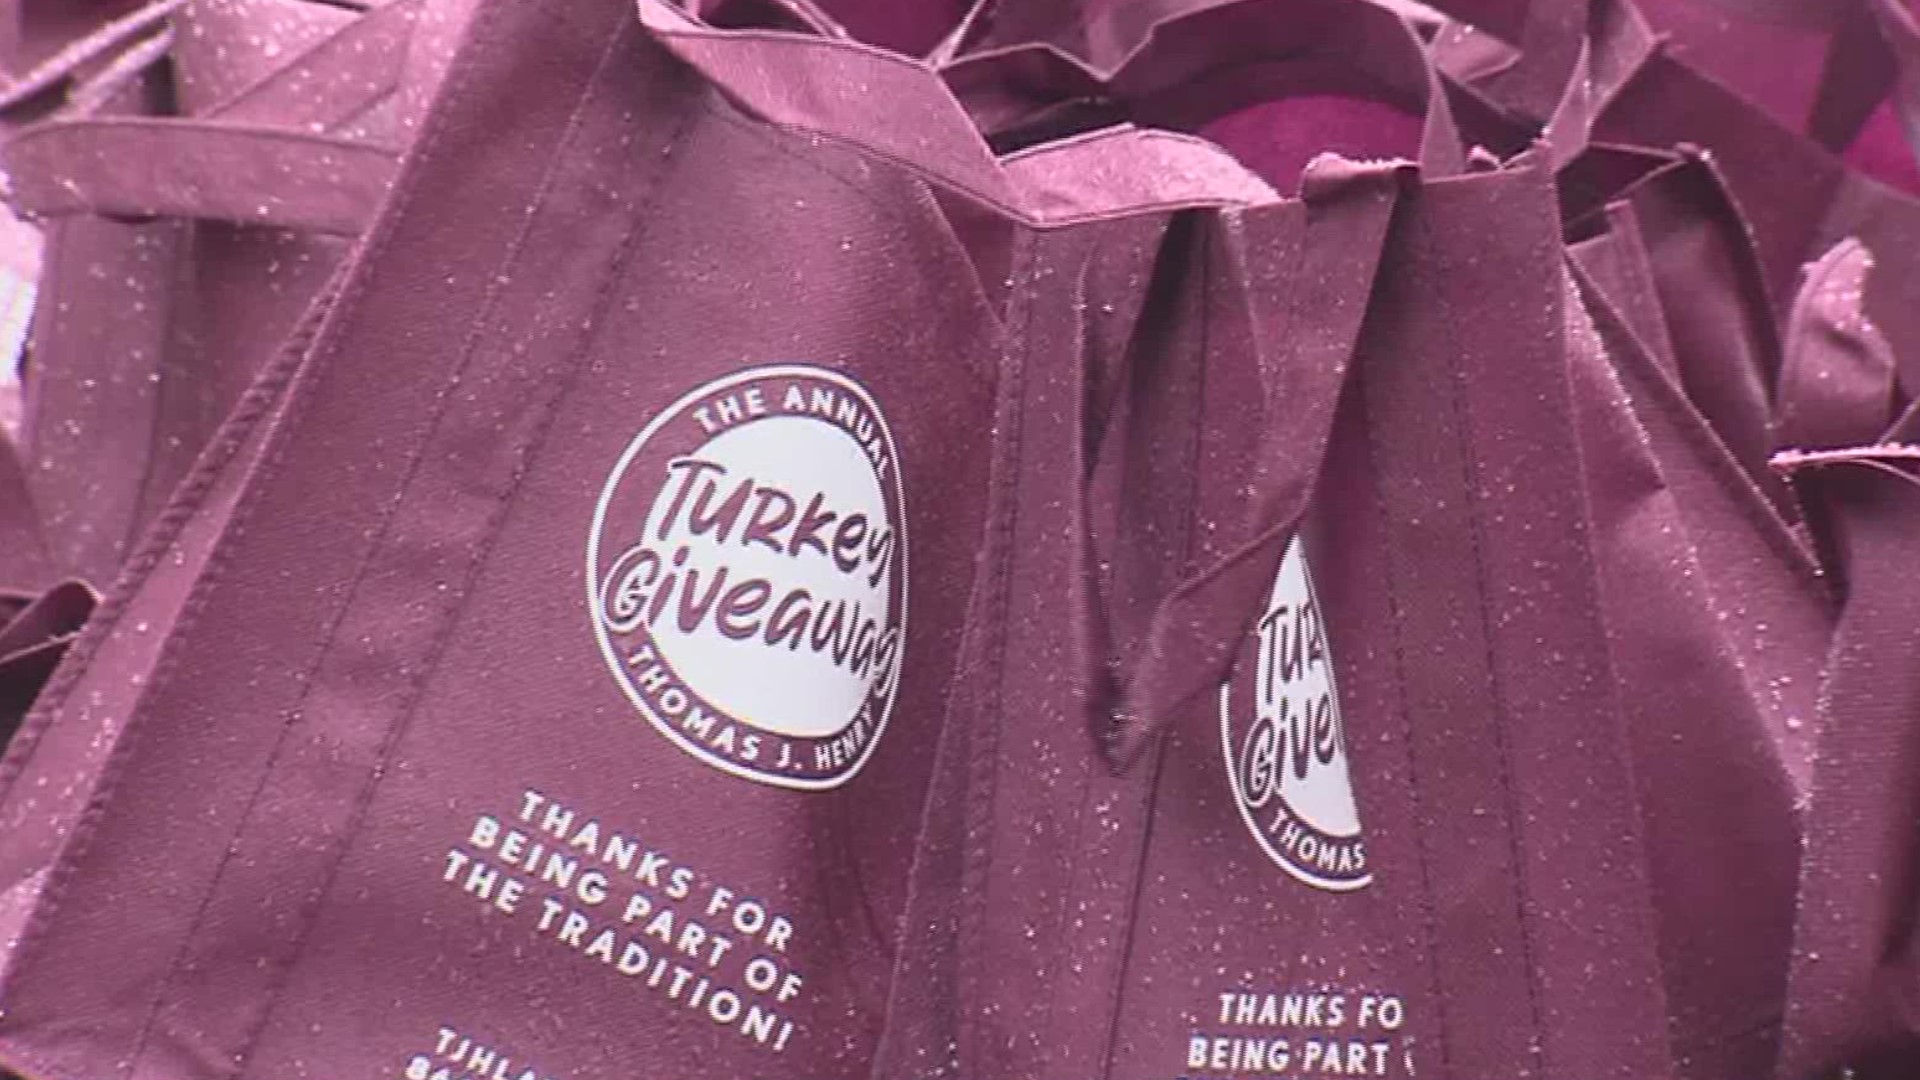 Thousands of turkeys were handed out in cities like, Freer, Alice and Corpus Christi.